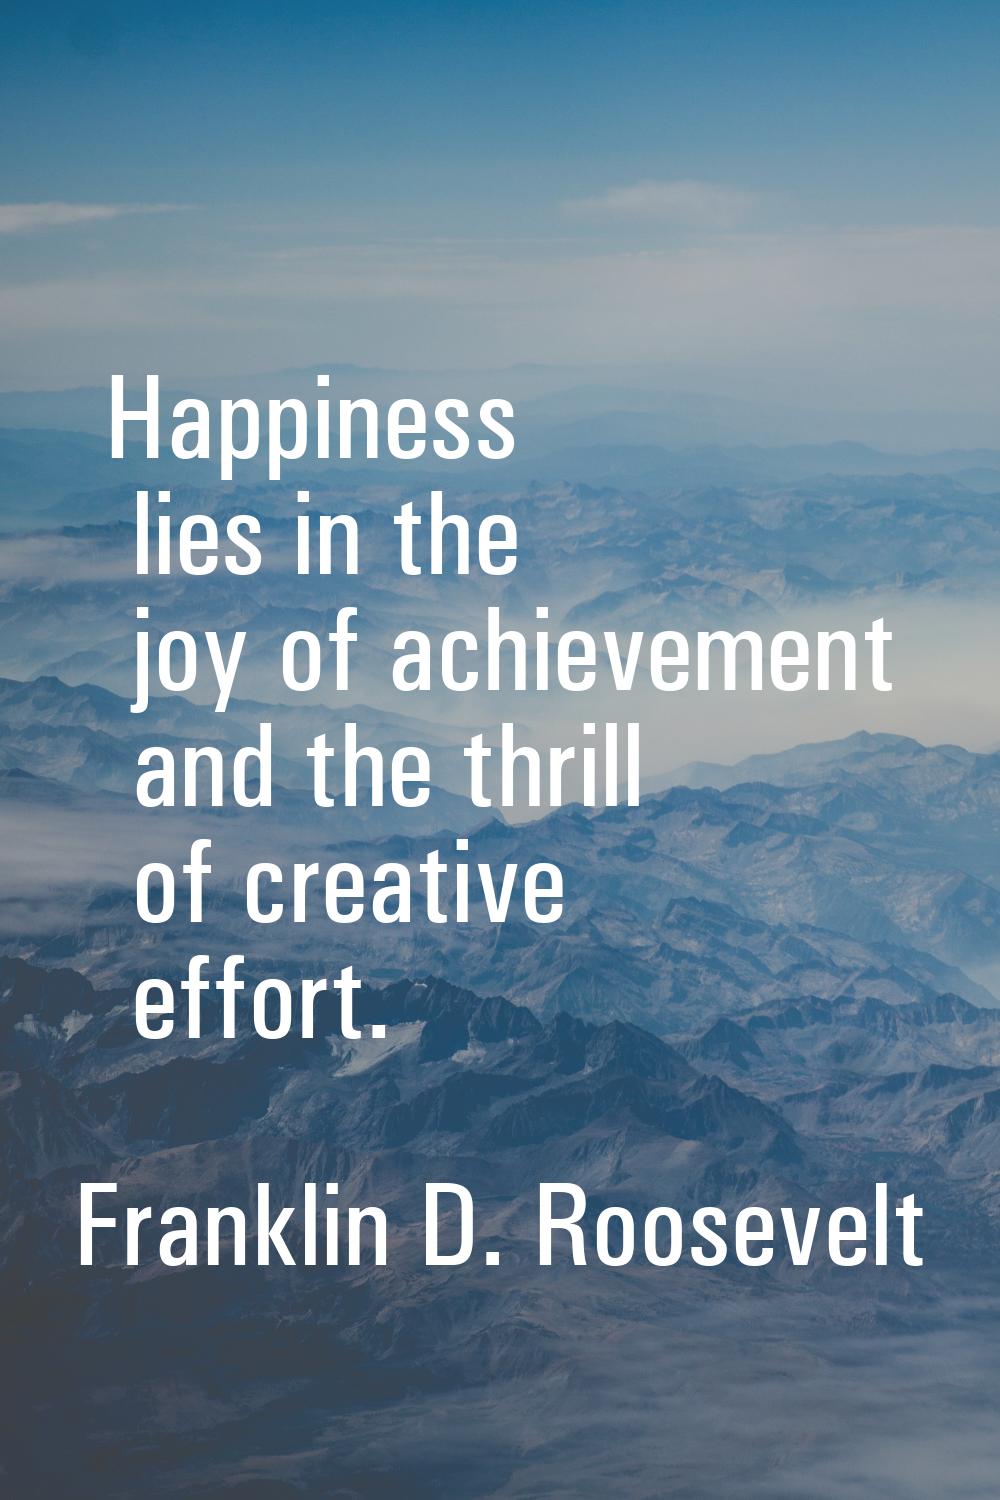 Happiness lies in the joy of achievement and the thrill of creative effort.